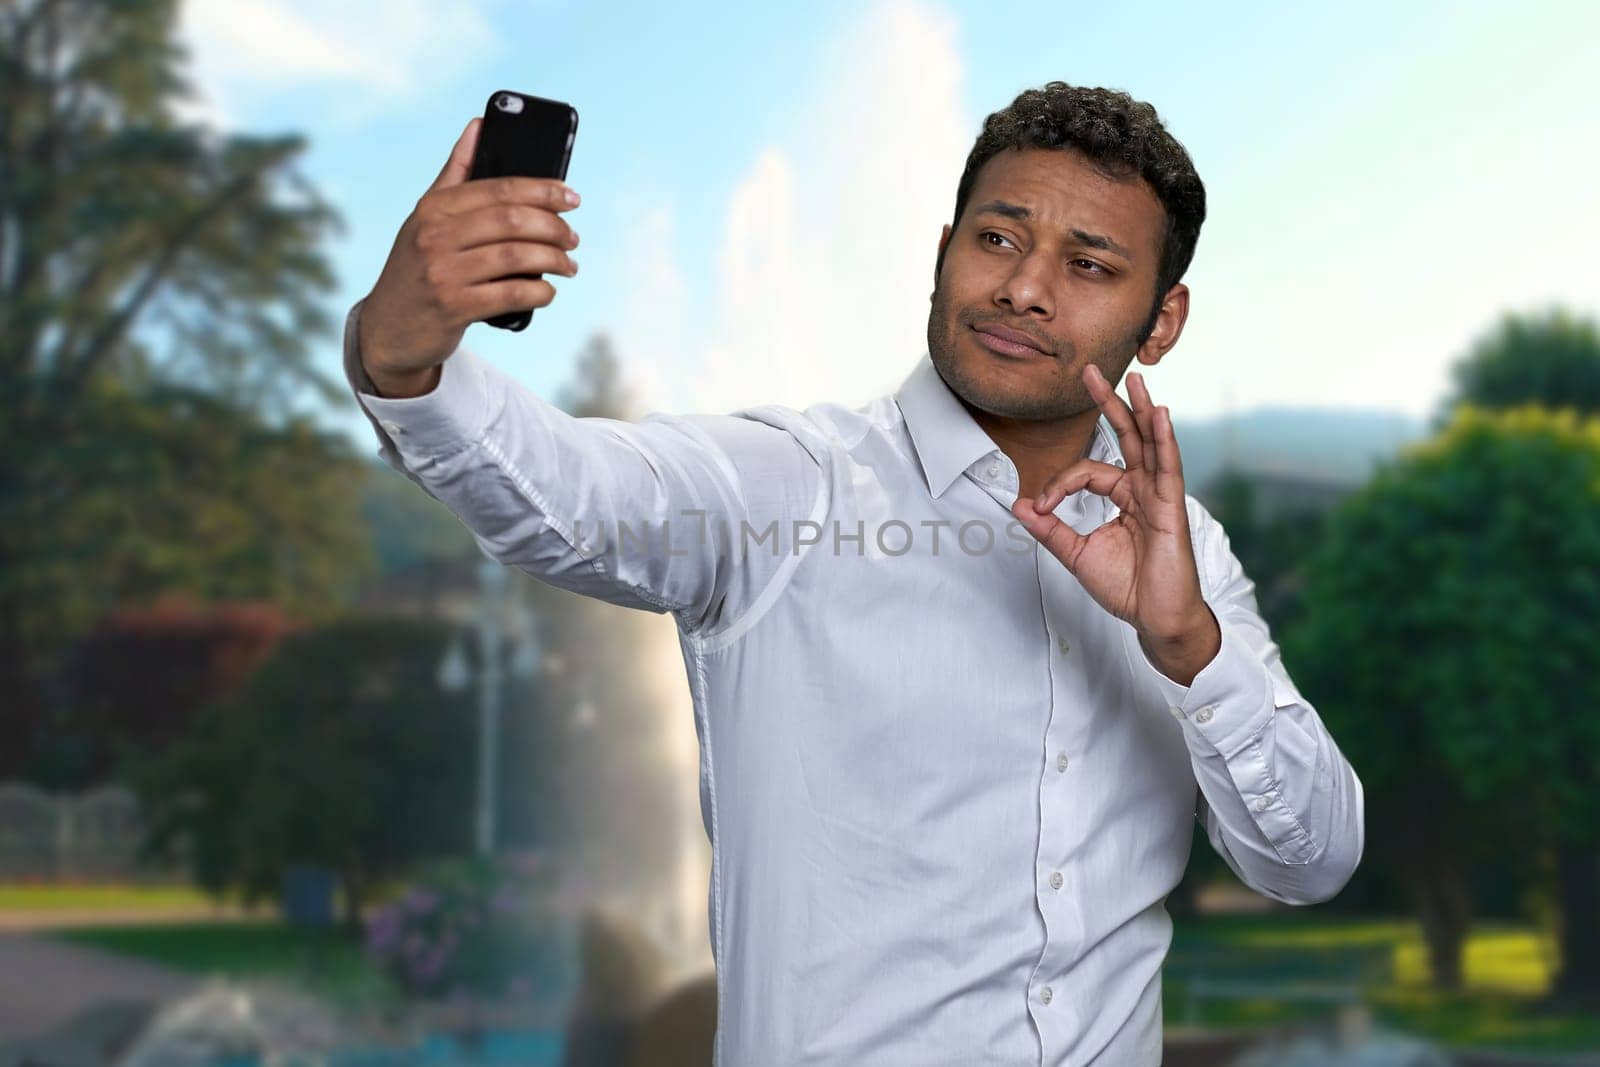 Handsome young man showing okey gesture while taking selfie outdoors. People, modern technology, gestures and lifestyle concept.